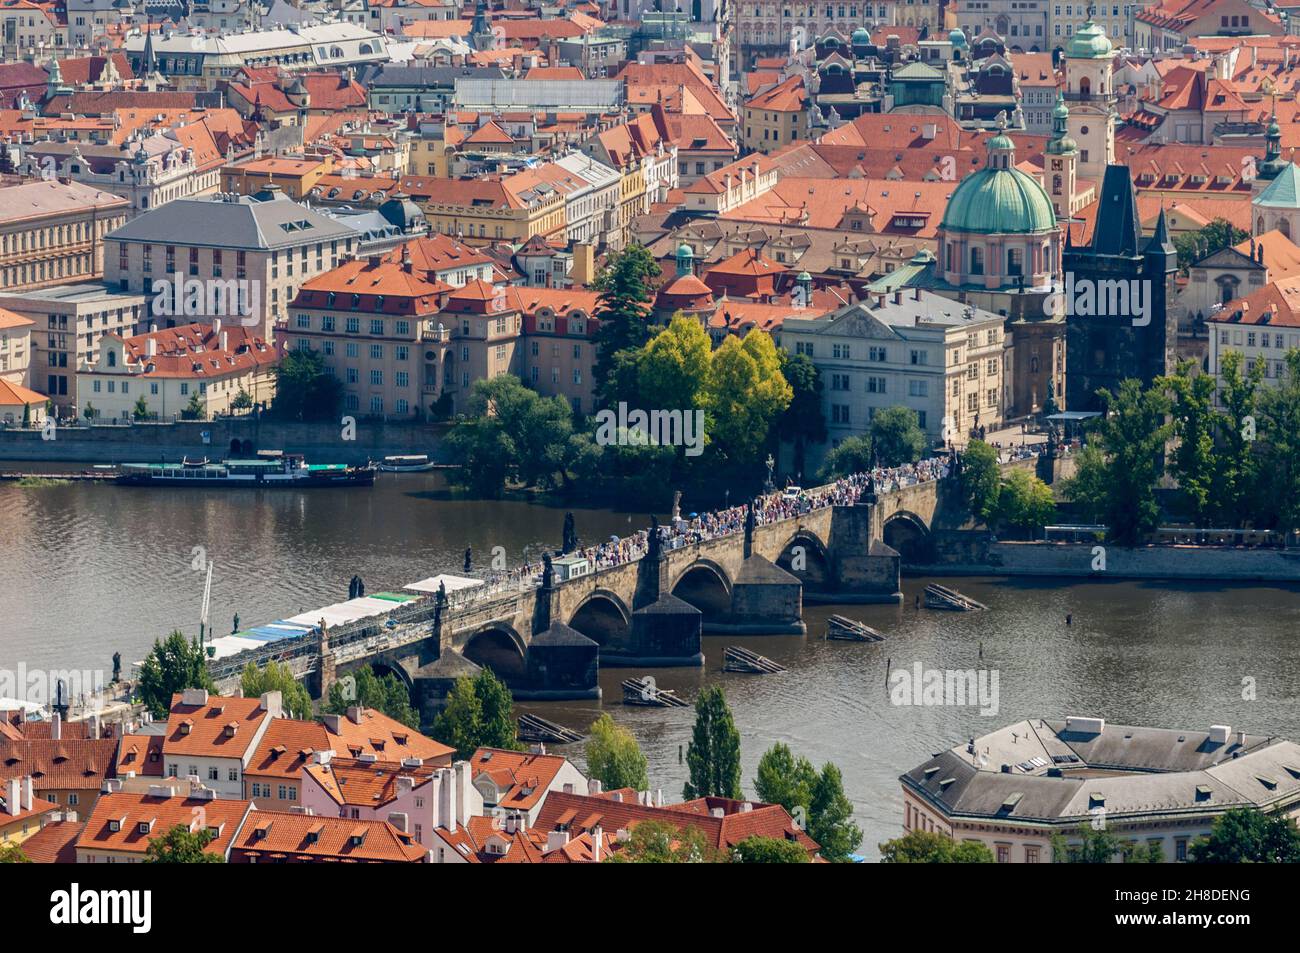 The medieval stone arch Charles Bridge (Karlův most) over the Vltava River and the colourful historic buildings of Prague Stock Photo